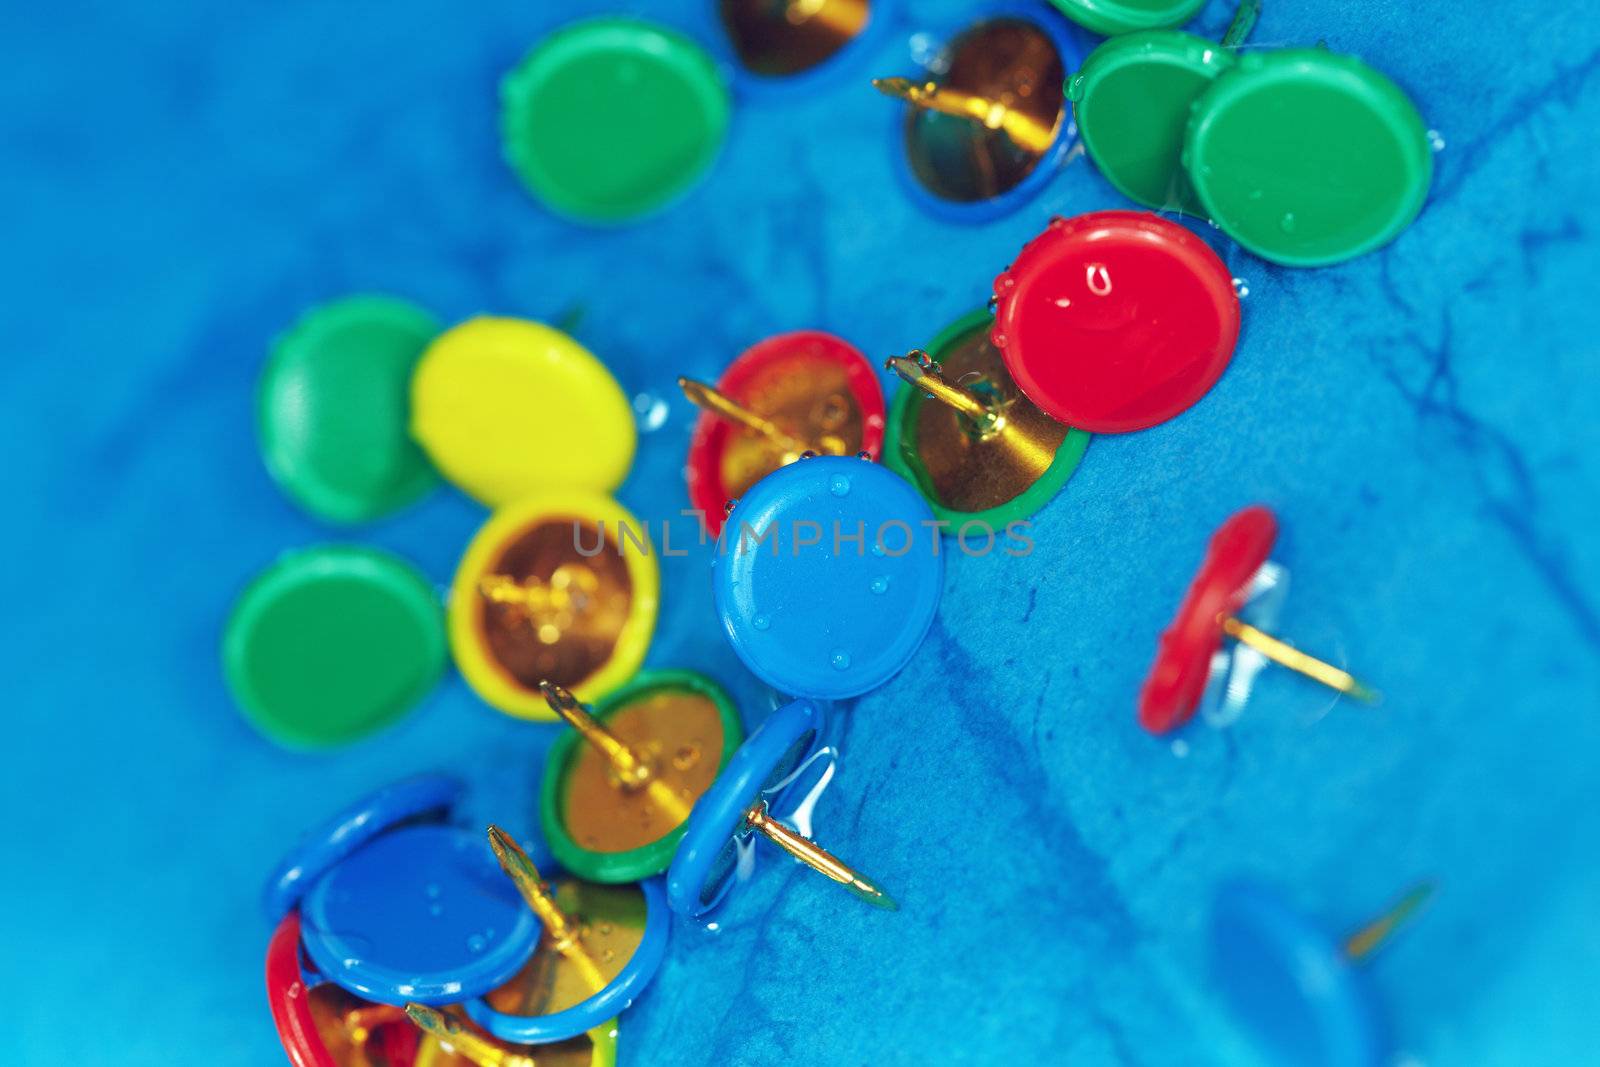 Wet pushpins on a blur background by Novic